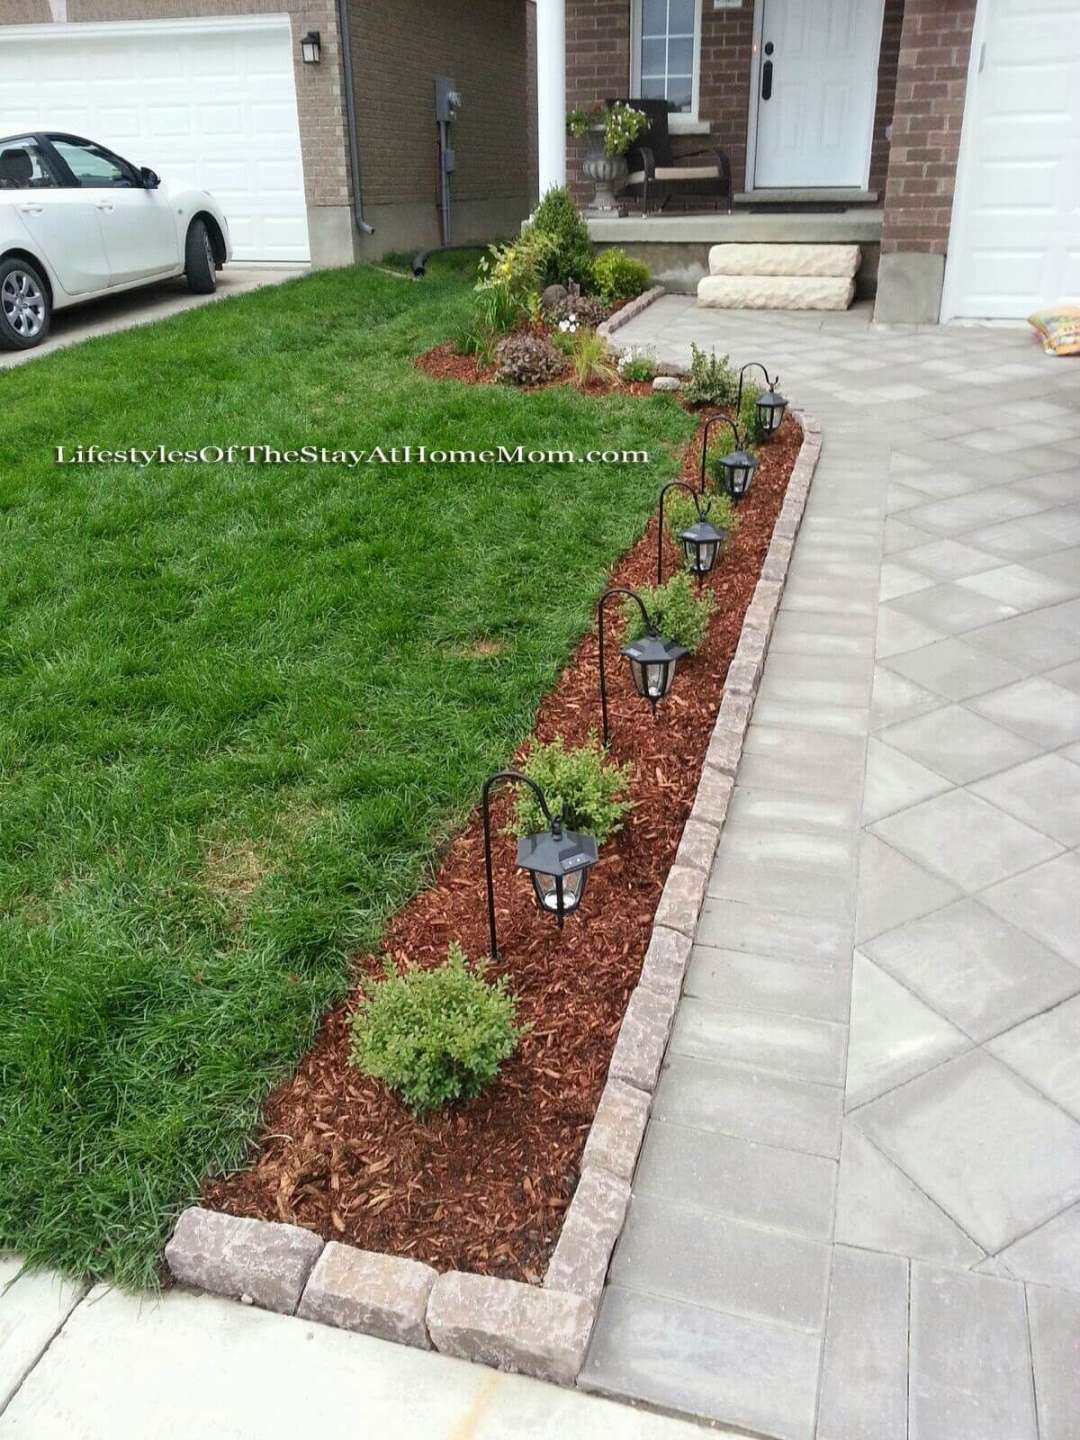 + Simple Front Yard Landscaping Ideas On a Budget - DIY Morning